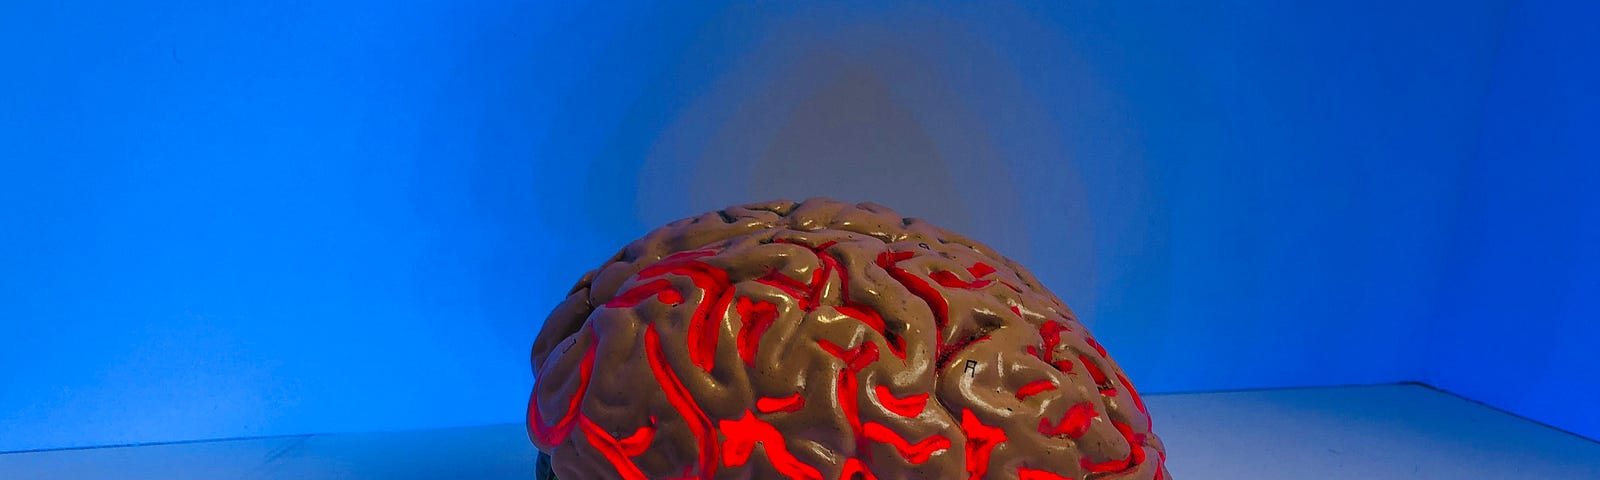 A colourful red and green model of a brain